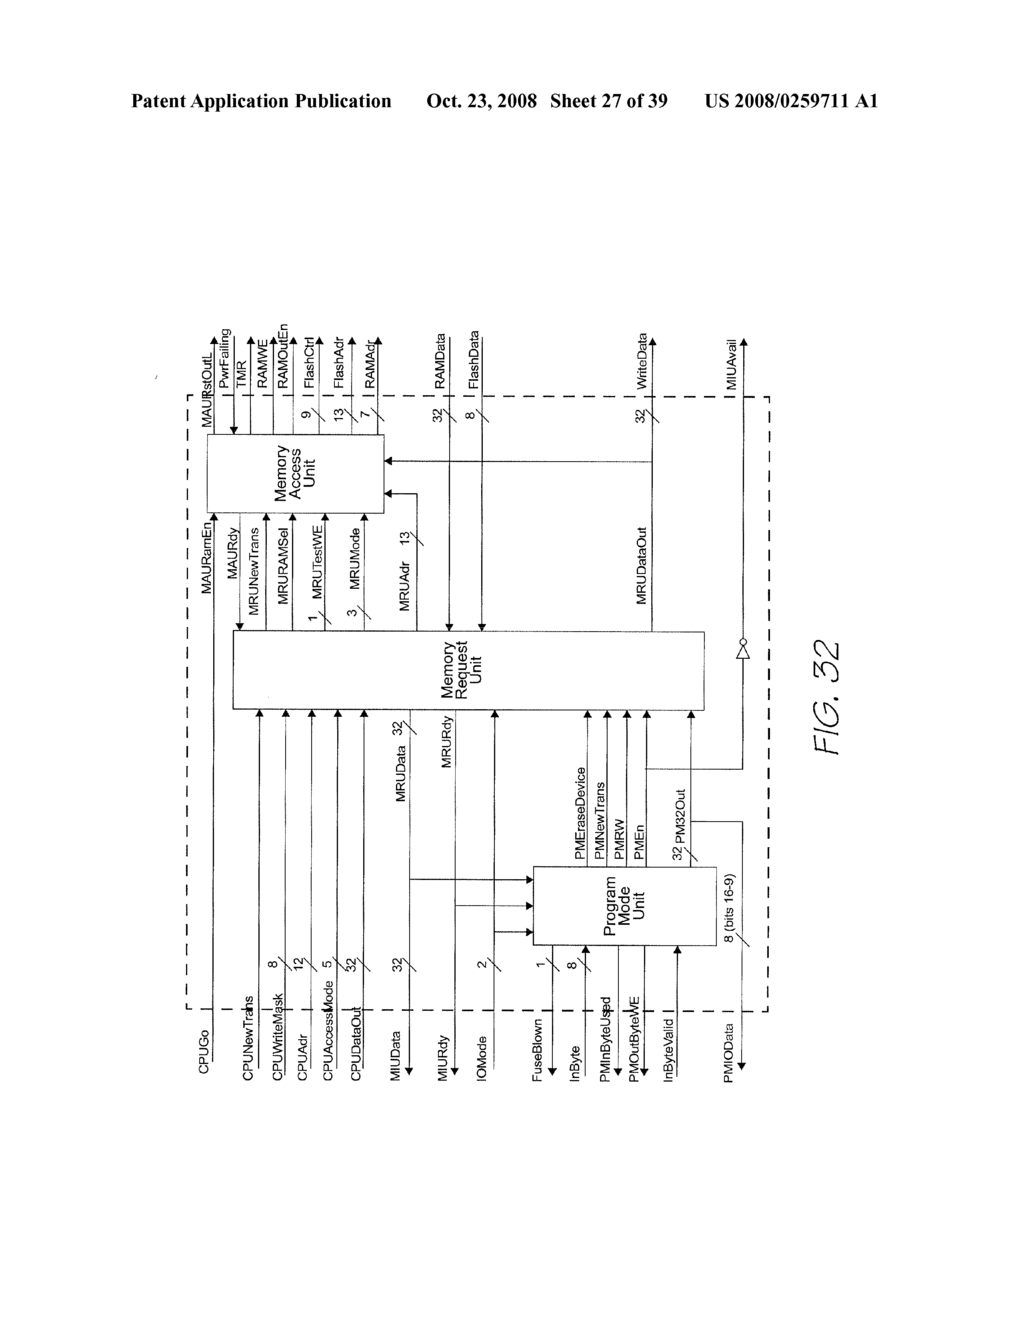 Print Engine Having Authentication Device For Preventing Multi-Word Memory Writing Upon Power Drop - diagram, schematic, and image 28